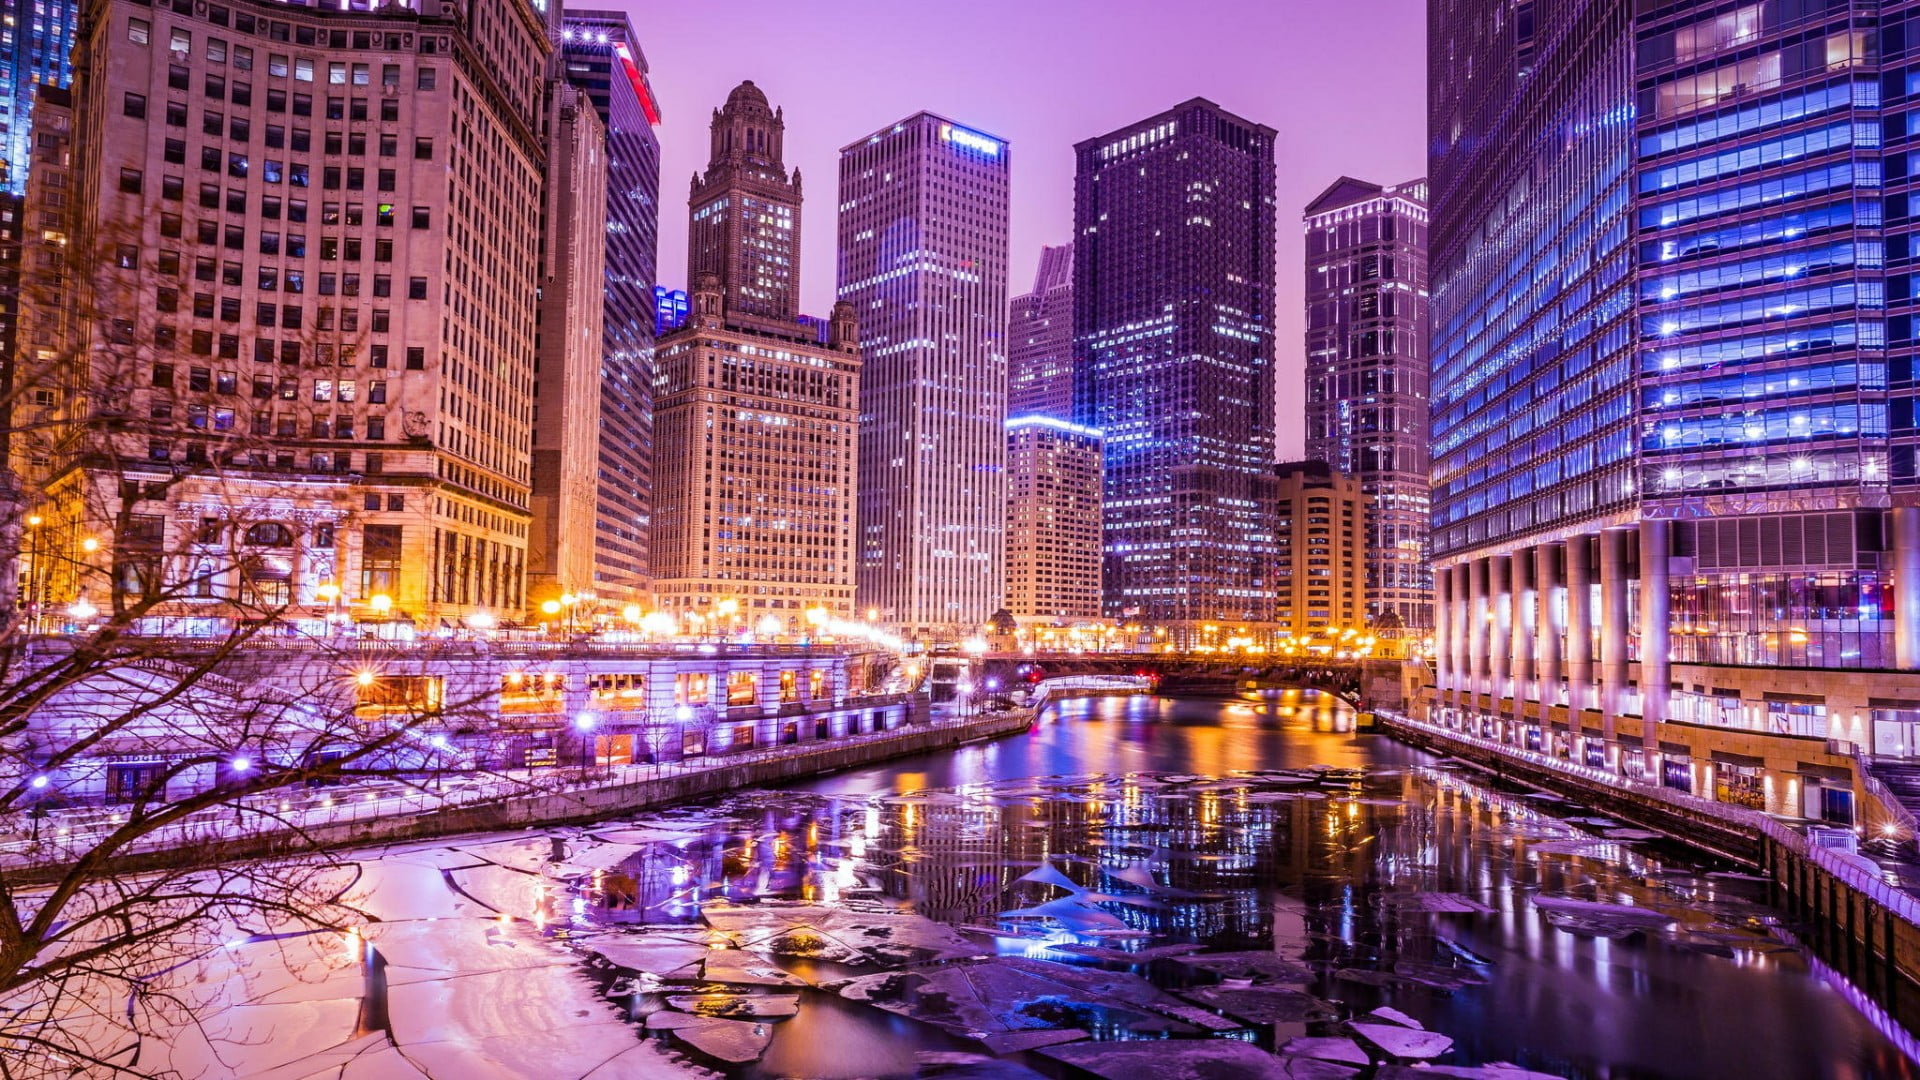 Wallpaper / residential district, chicago riverwalk, river, built structure, architecture, skyscraper, chicago, winter, evening, city lights, dusk, cold temperature free download